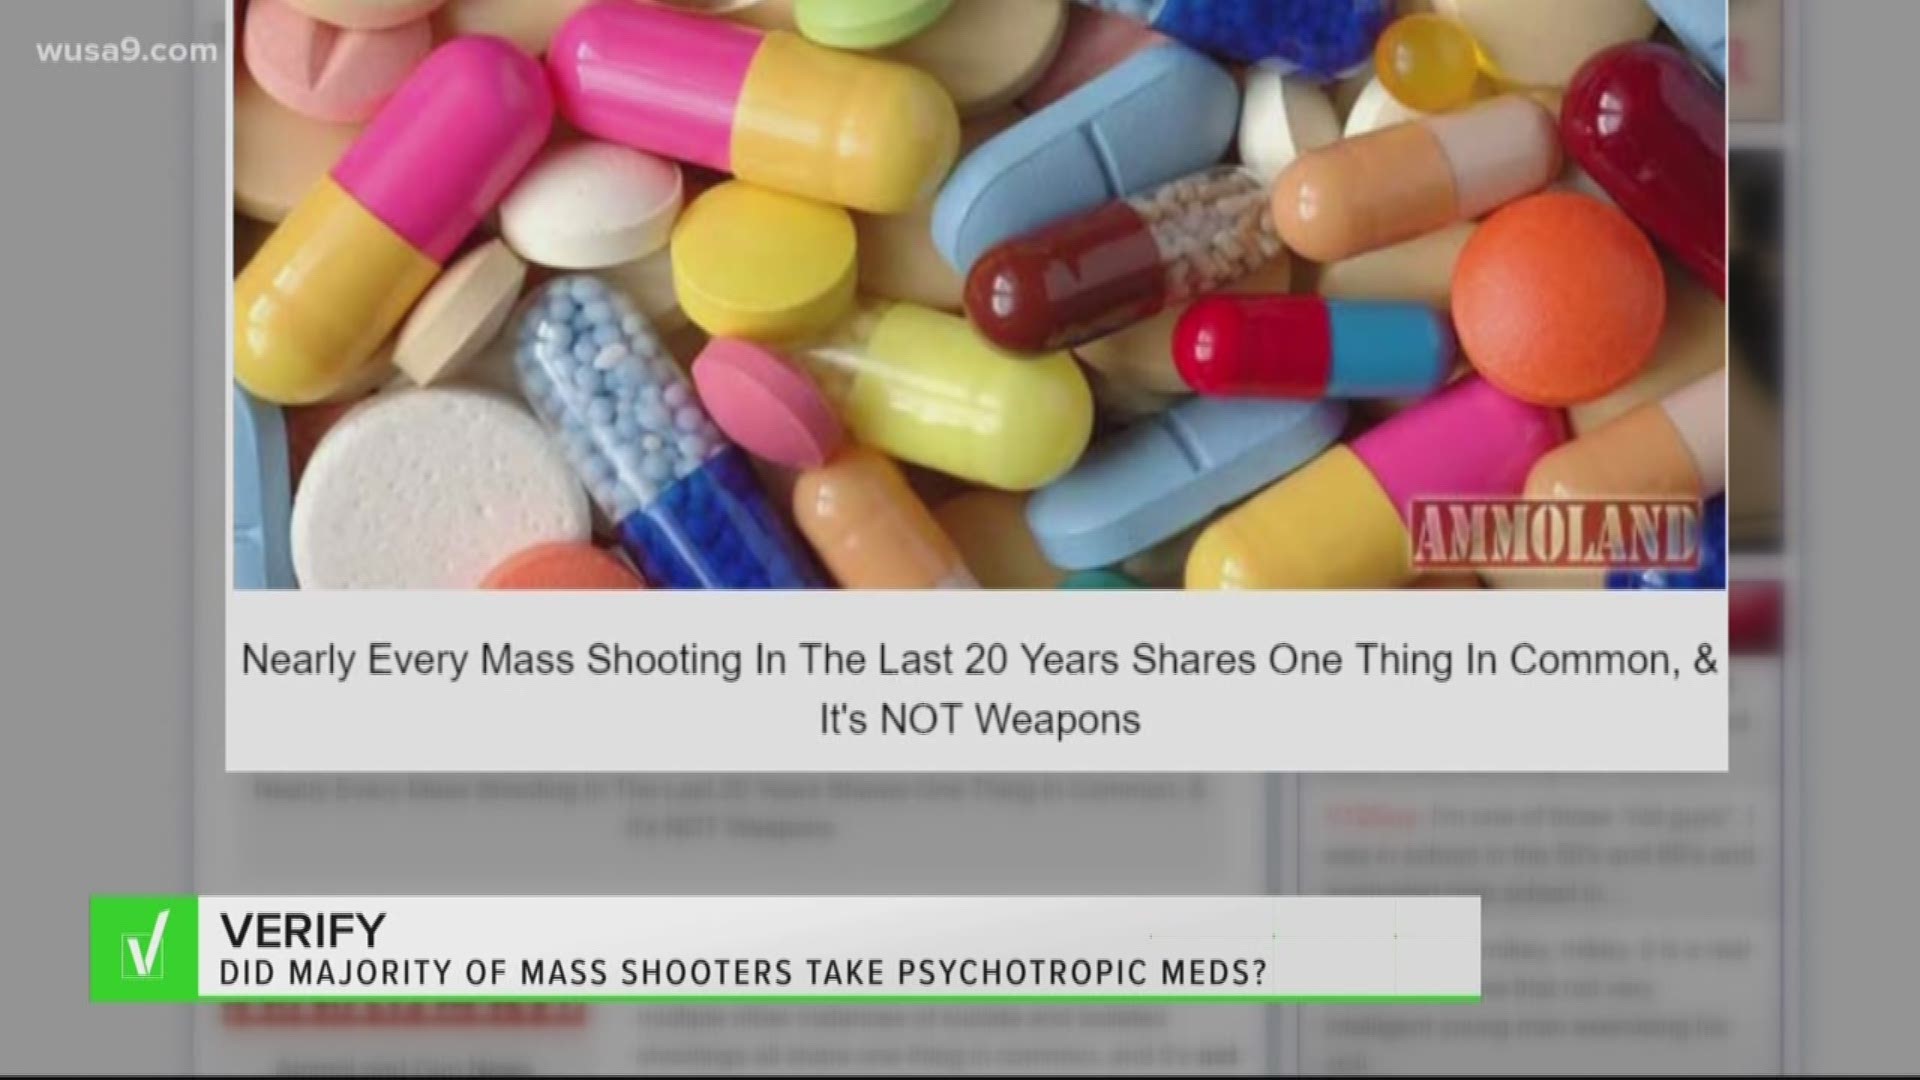 Experts say this claim is false: very few perpetrators have taken psychotropic medications, and there is no evidence linking them to mass shootings